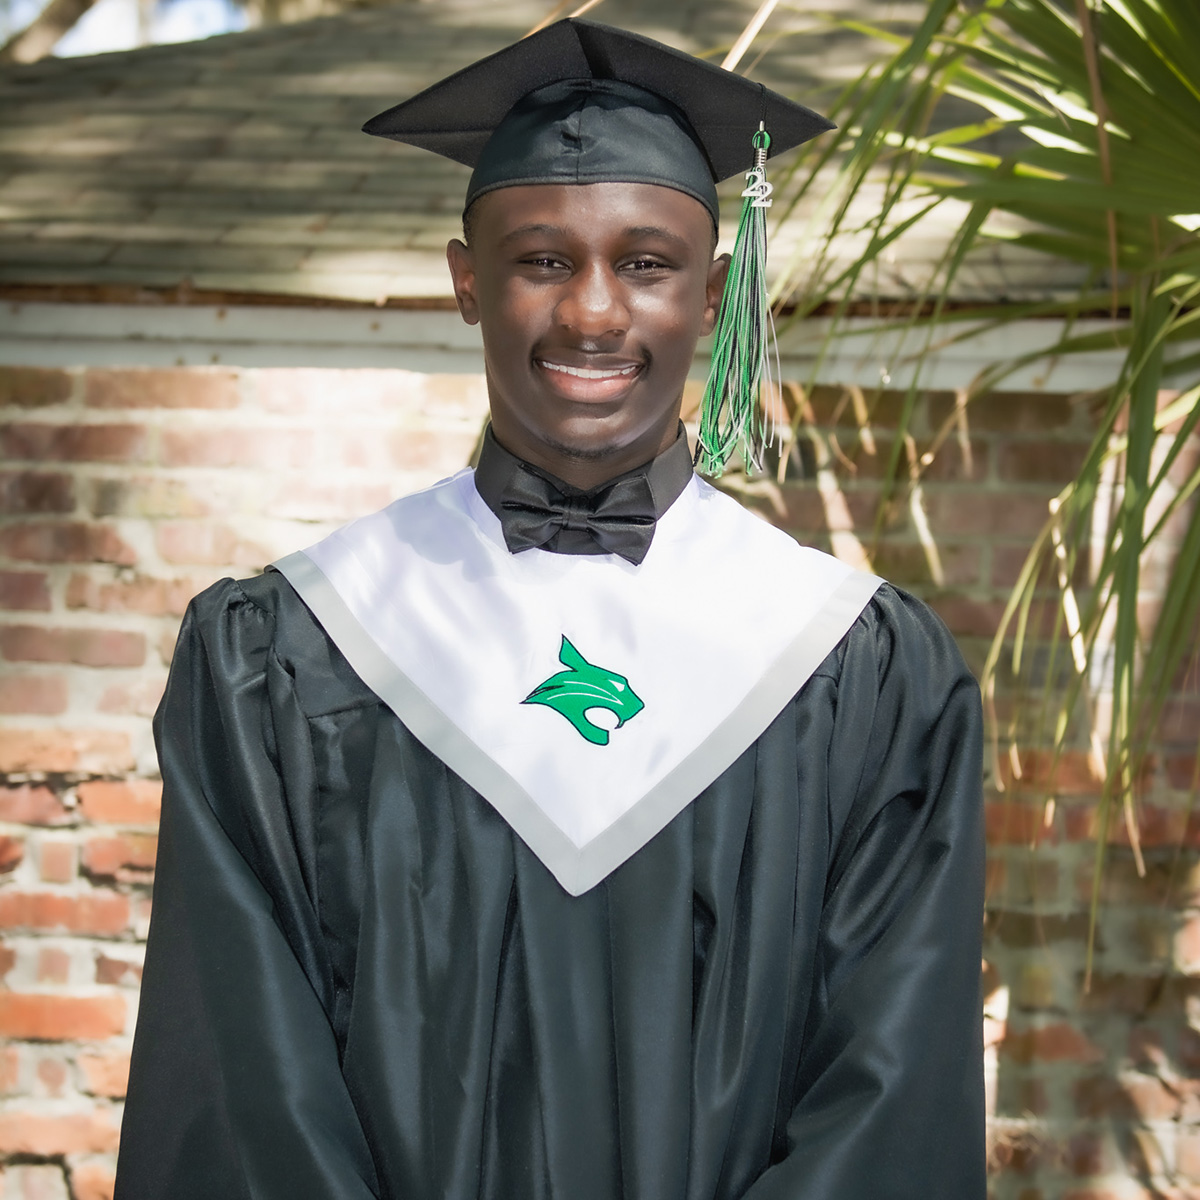 Man in cap and gown standing in front of brick wall